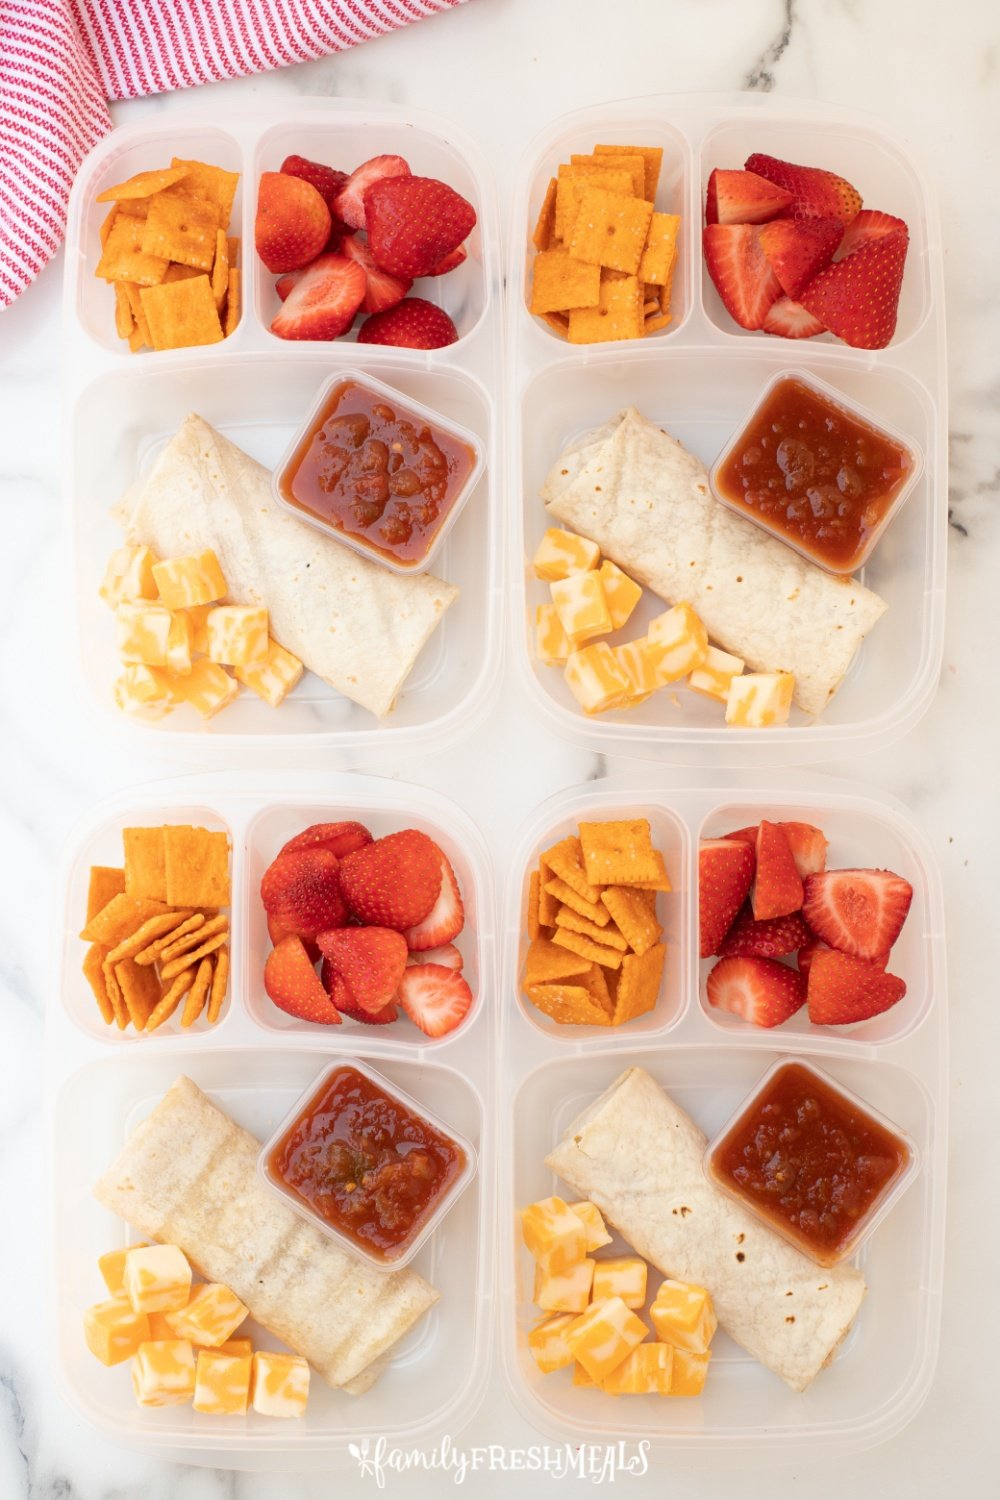 I’ve got a new lunchbox idea for you today – this time, a Mexican-themed one. Pack this Burrito Easy Lunchbox Idea for work or school. via @familyfresh